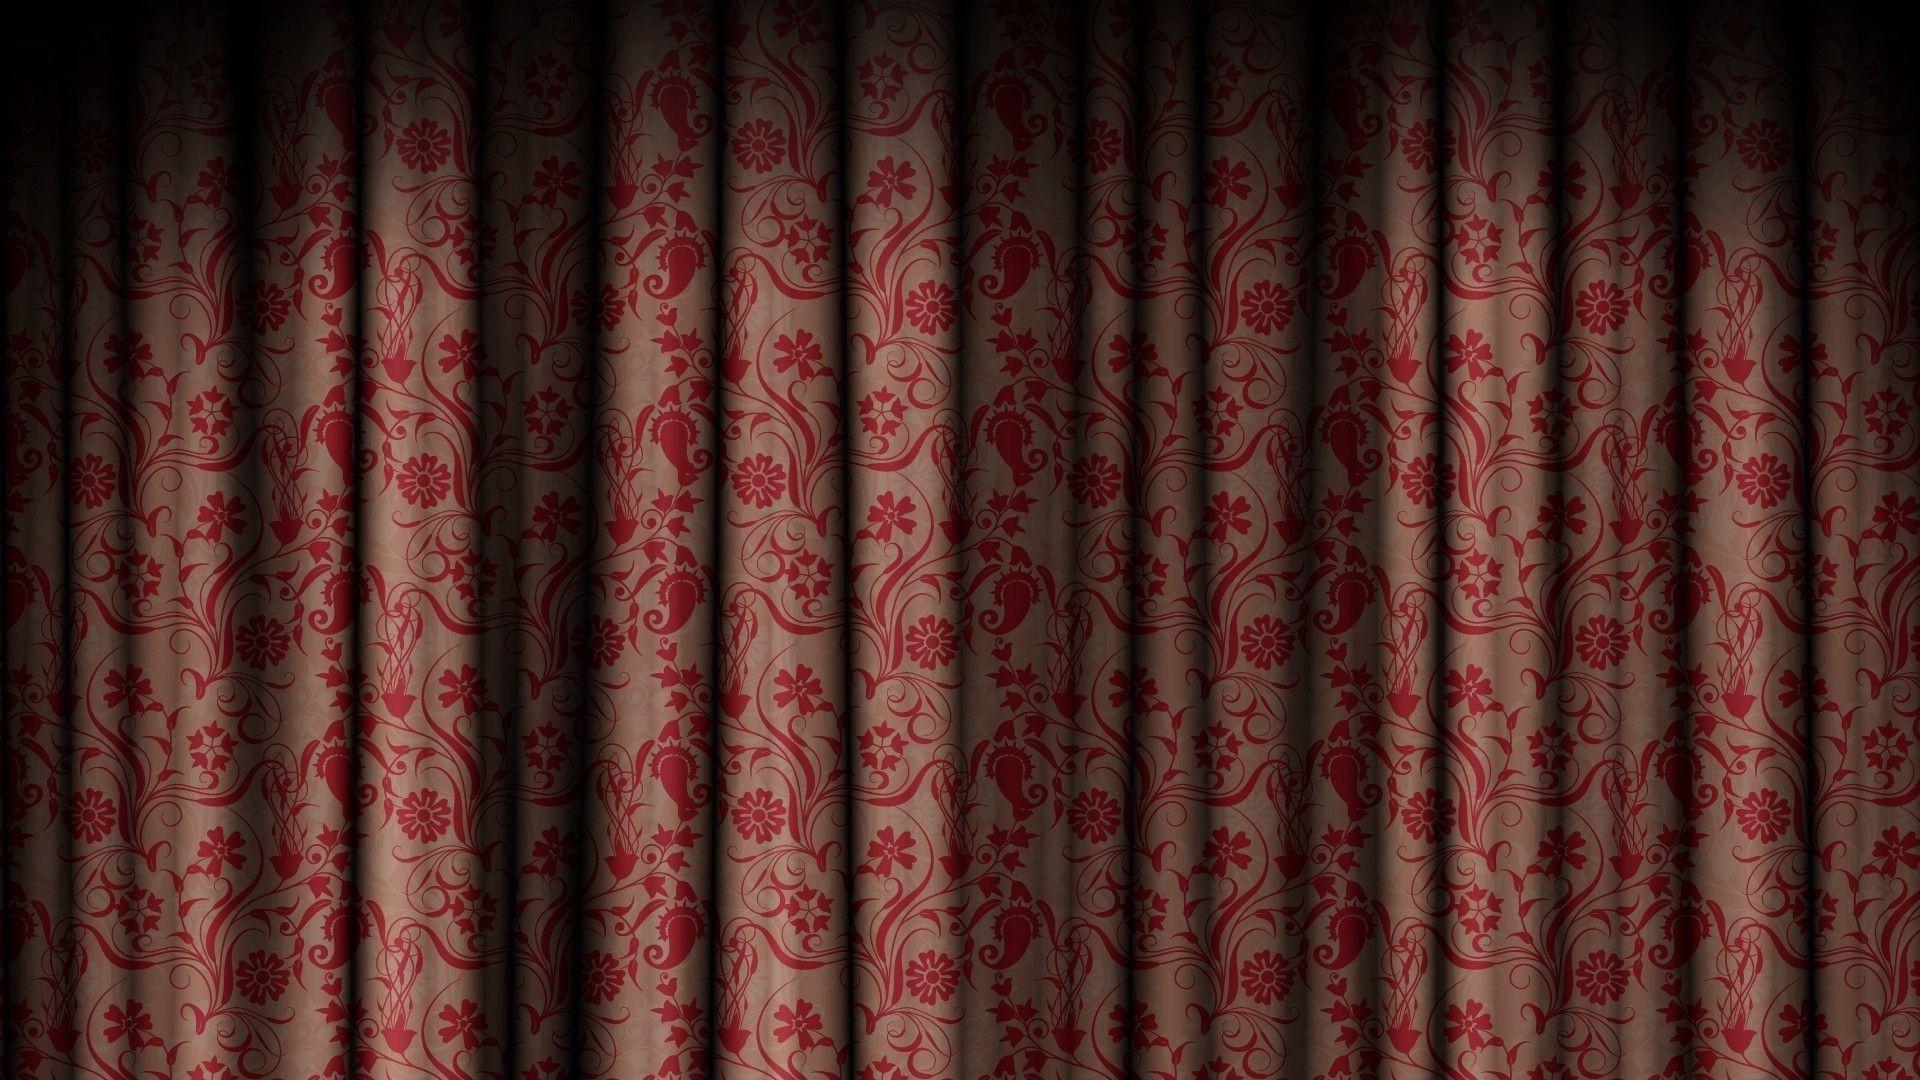 Details 100 curtain background hd - Abzlocal.mx